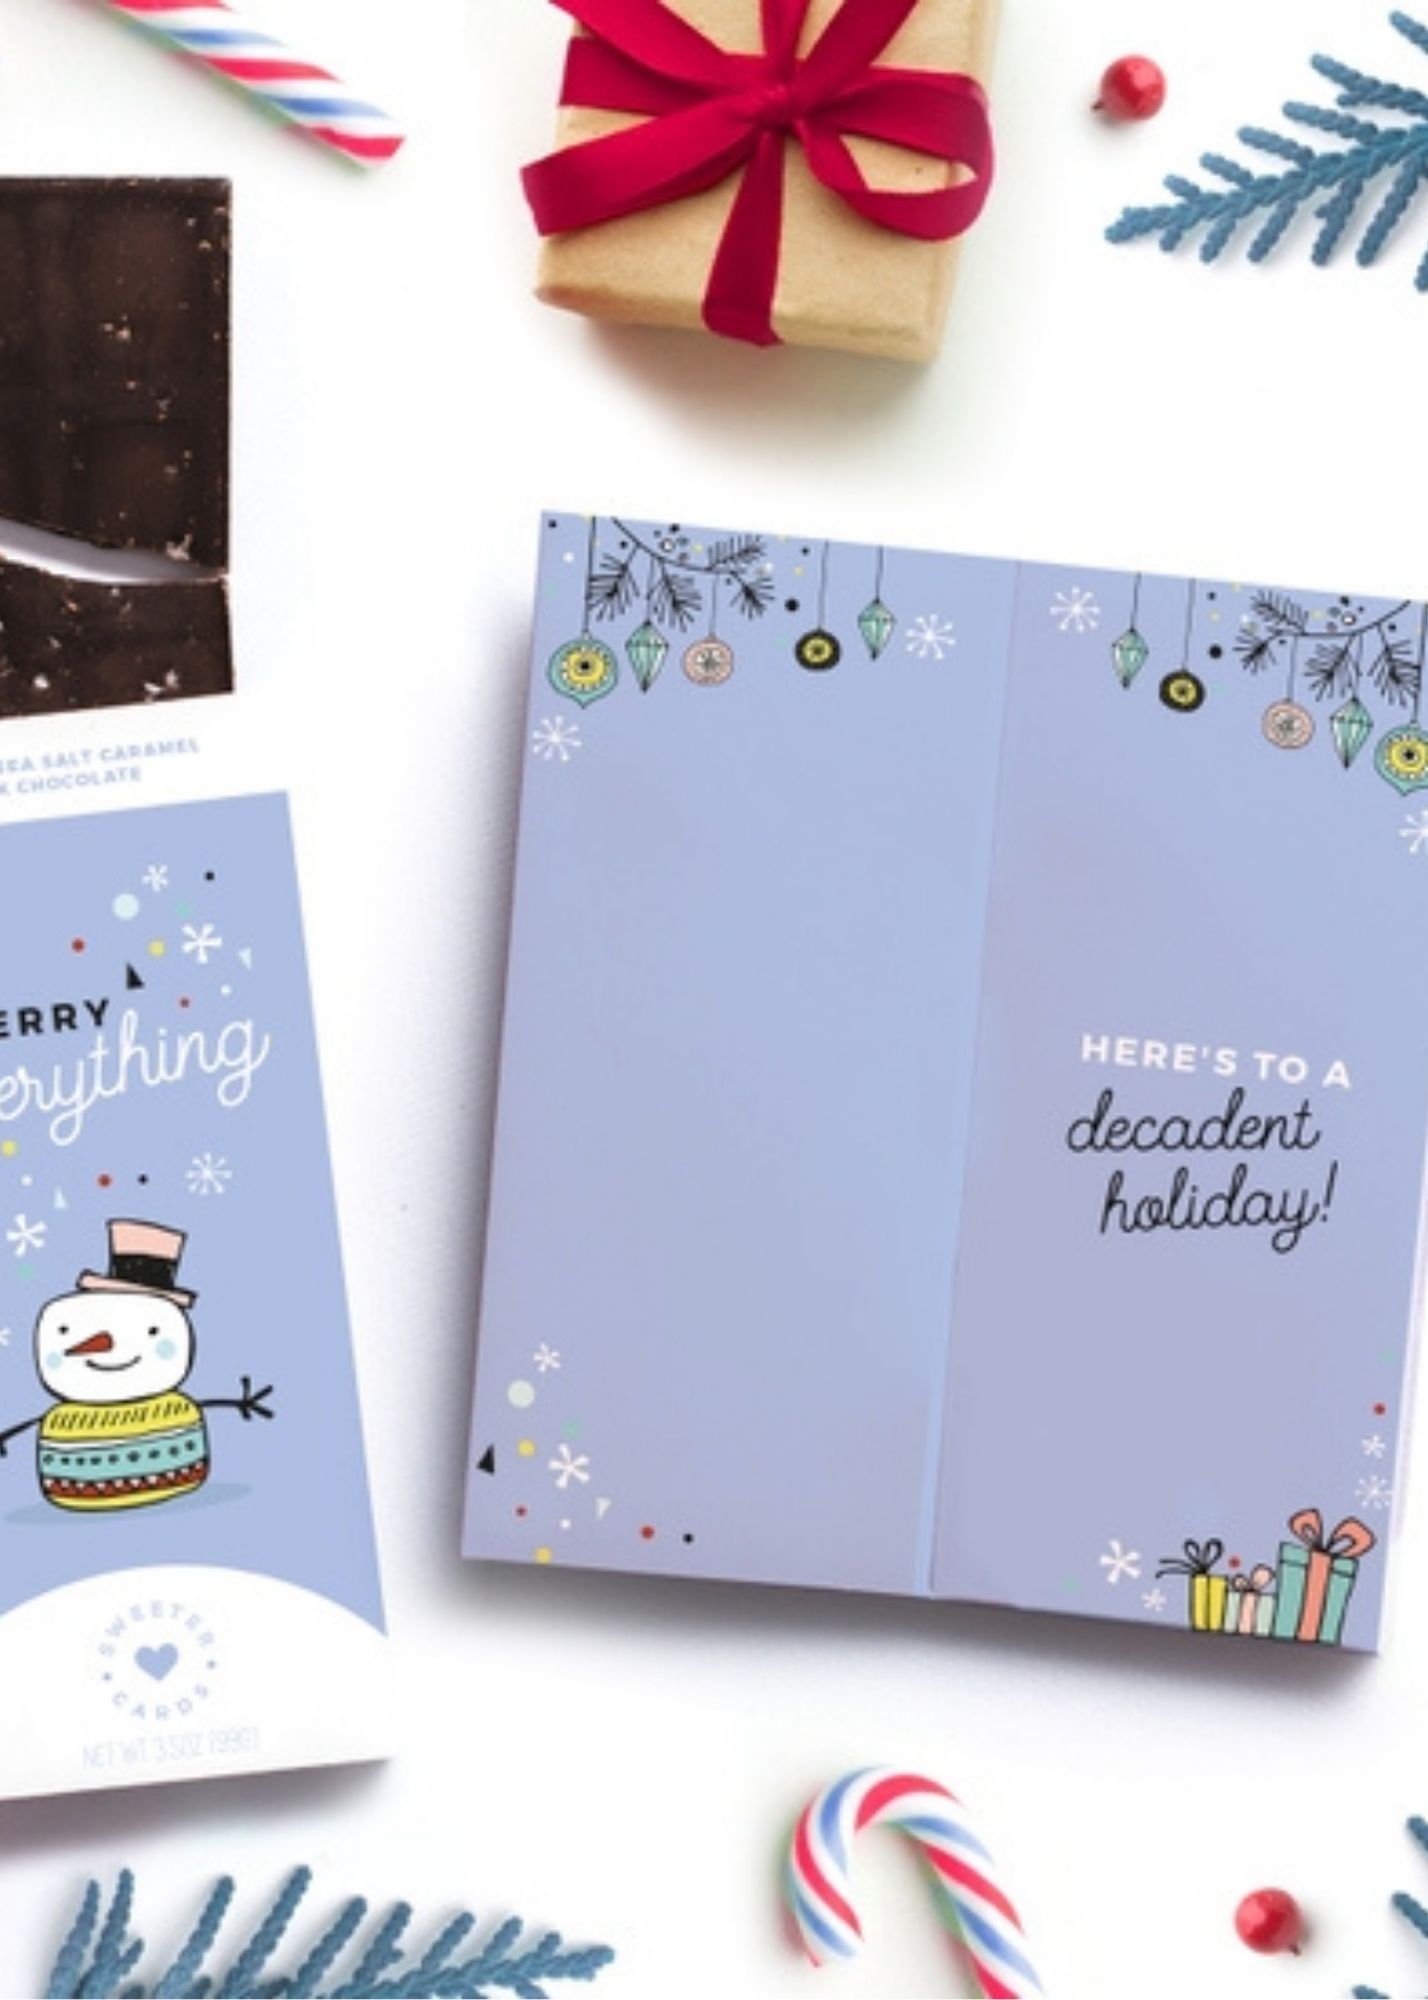 Merry Everything Chocolate Holiday Card Home & Lifestyle Sweeter Cards - Chocolate Bar Greeting Cards